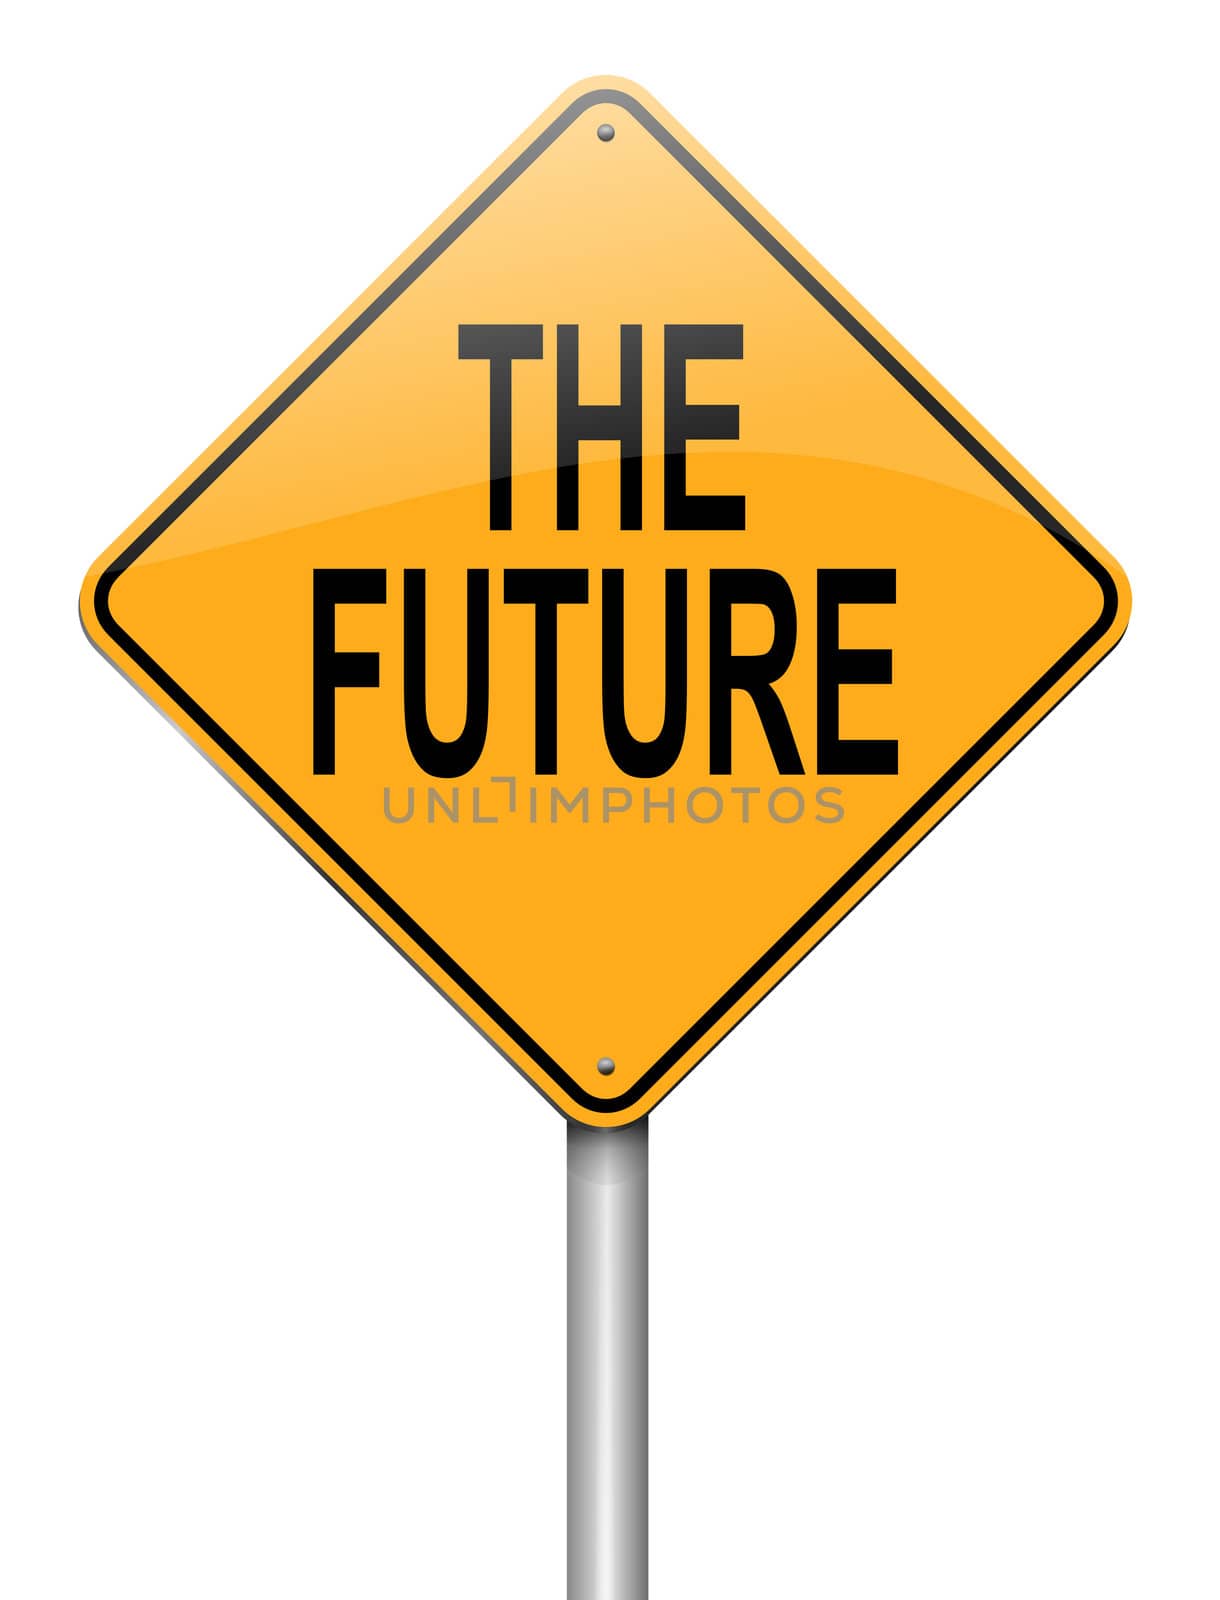 Illustration depicting a roadsign with a future concept. White background.